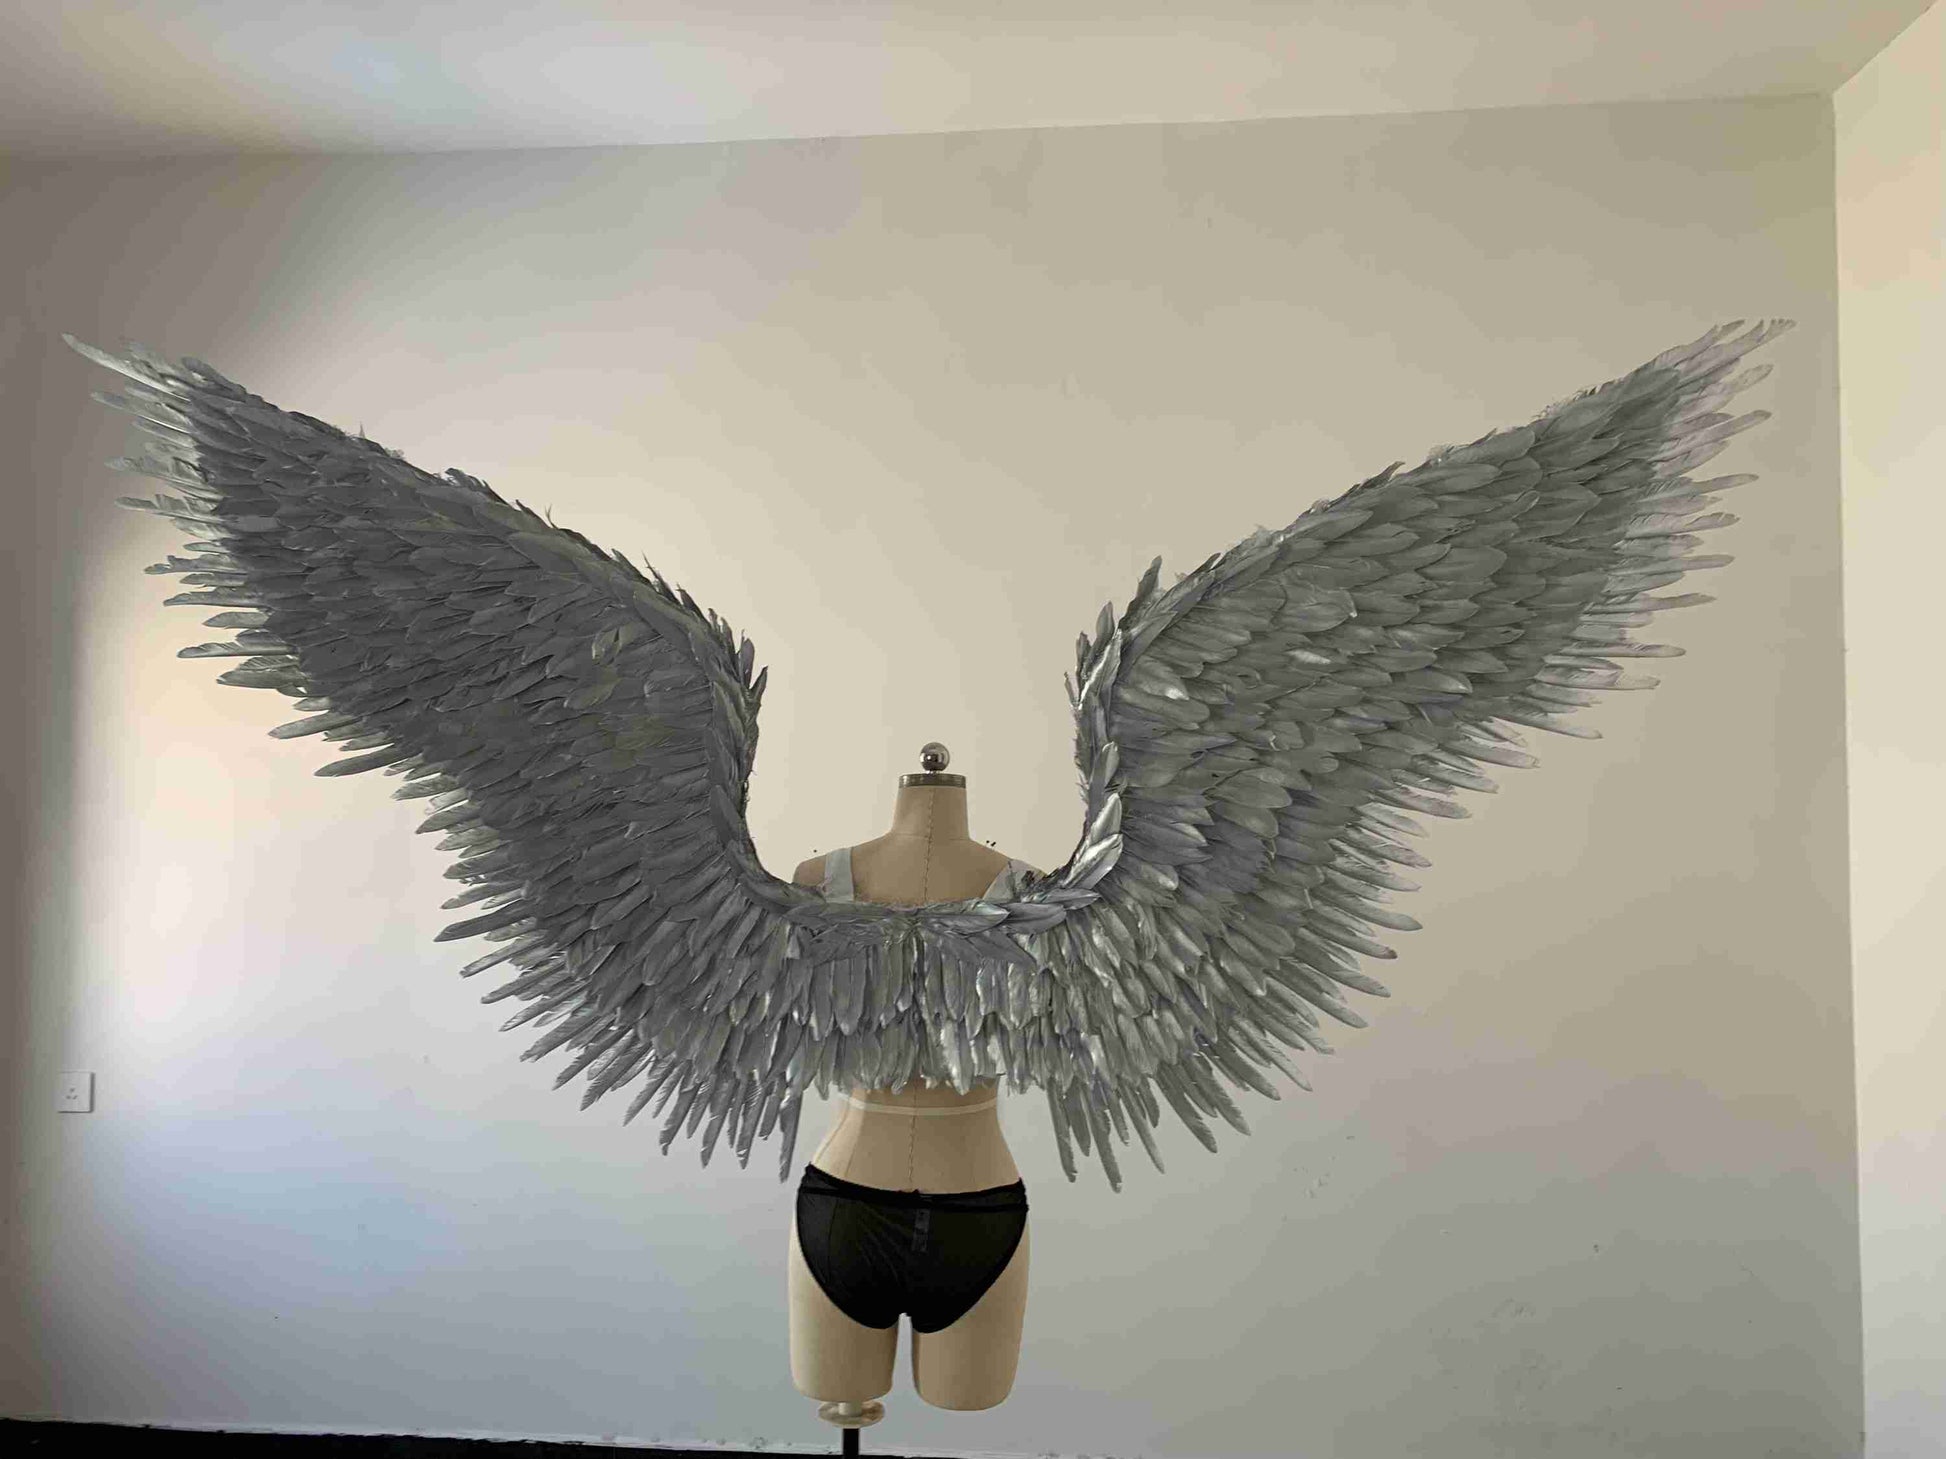 Our silver color angel wings from the back. Made from goose feathers. Wings for angel costume or devil costume. Suitable for photoshoots.